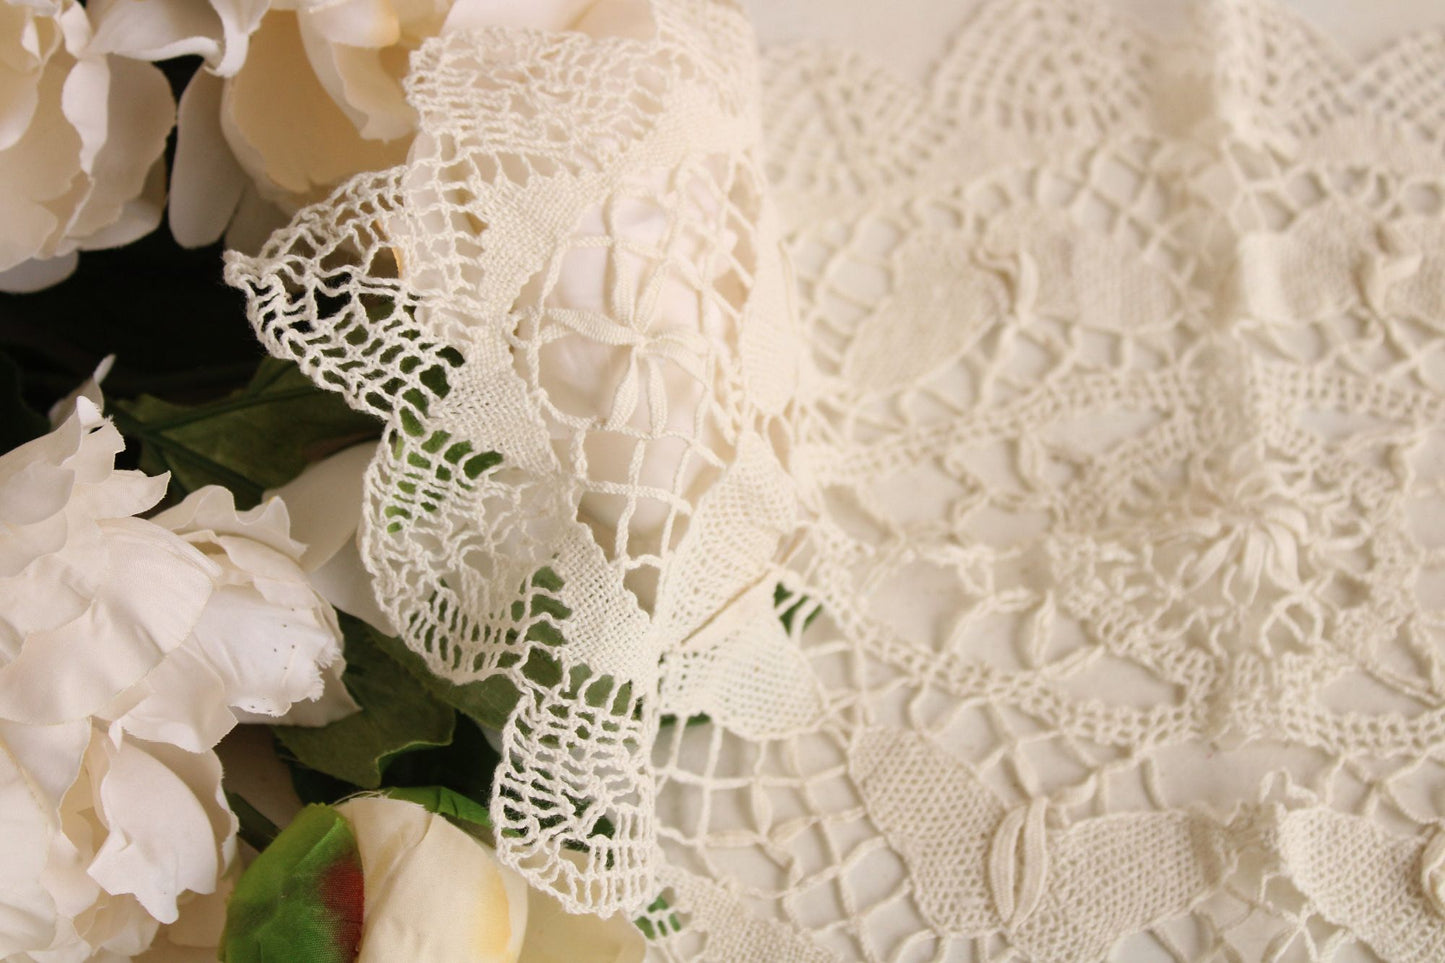 Vintage Ivory Crochet Doily with Butterflies